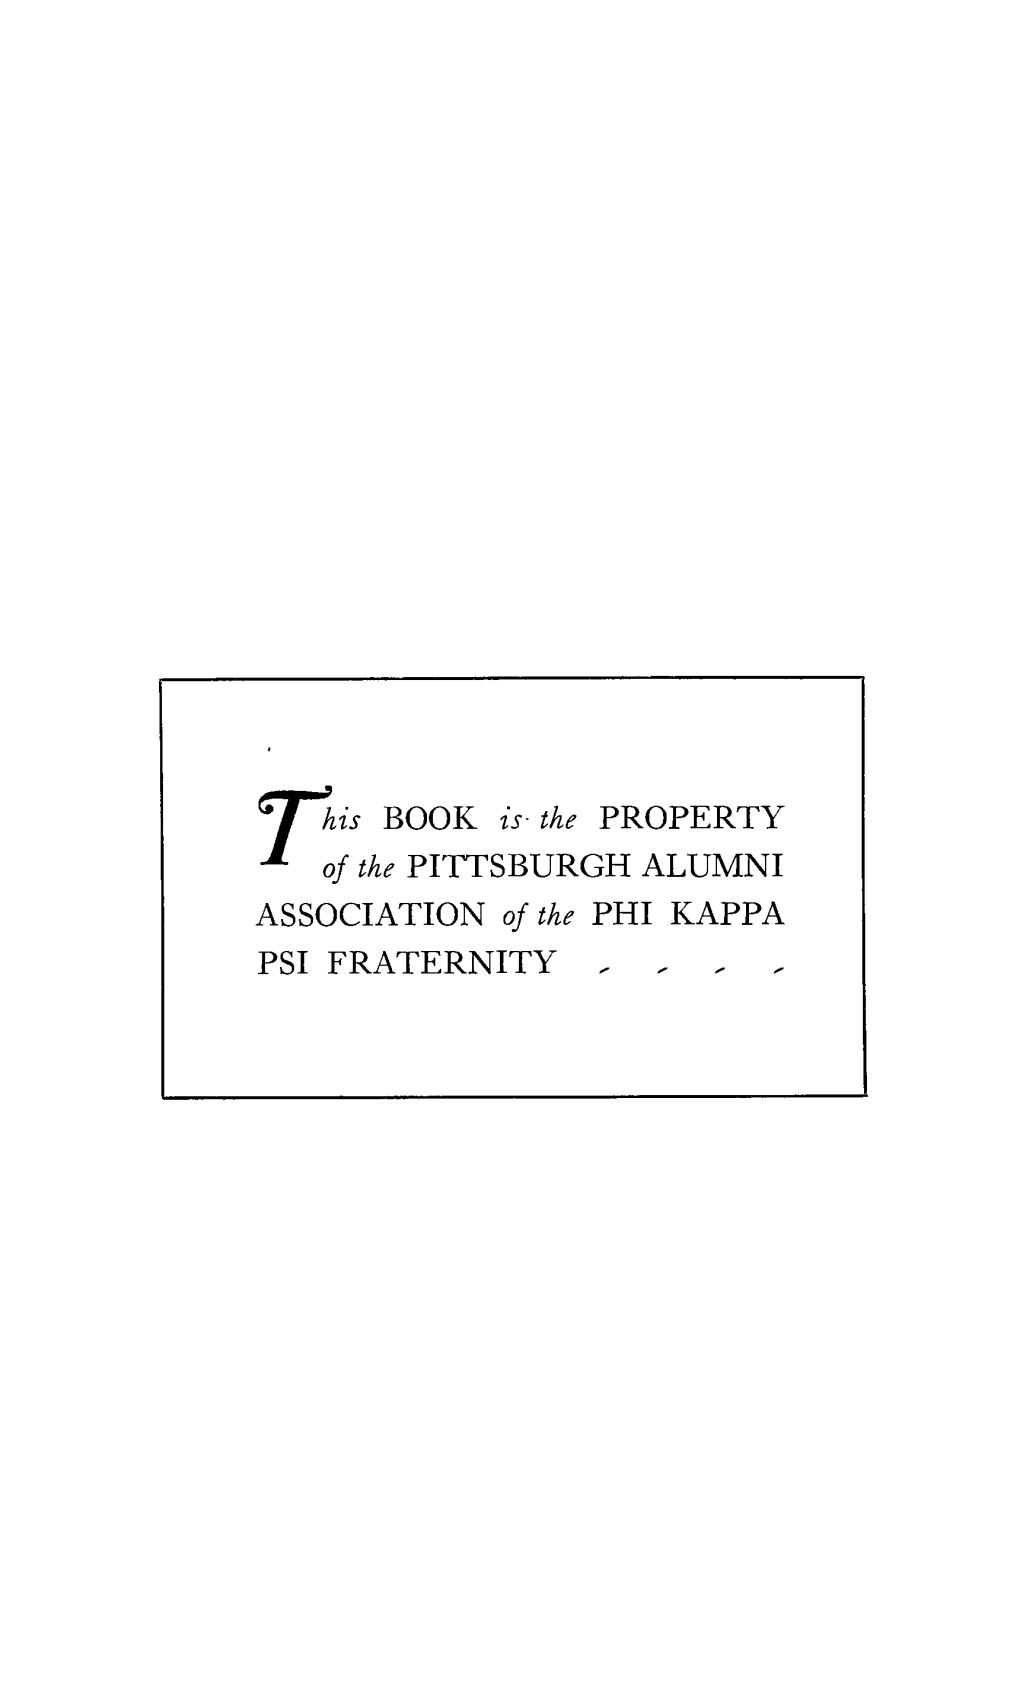 1 His BOOK Is- the PROPERTY 0/ ^A^ PITTSBURGH